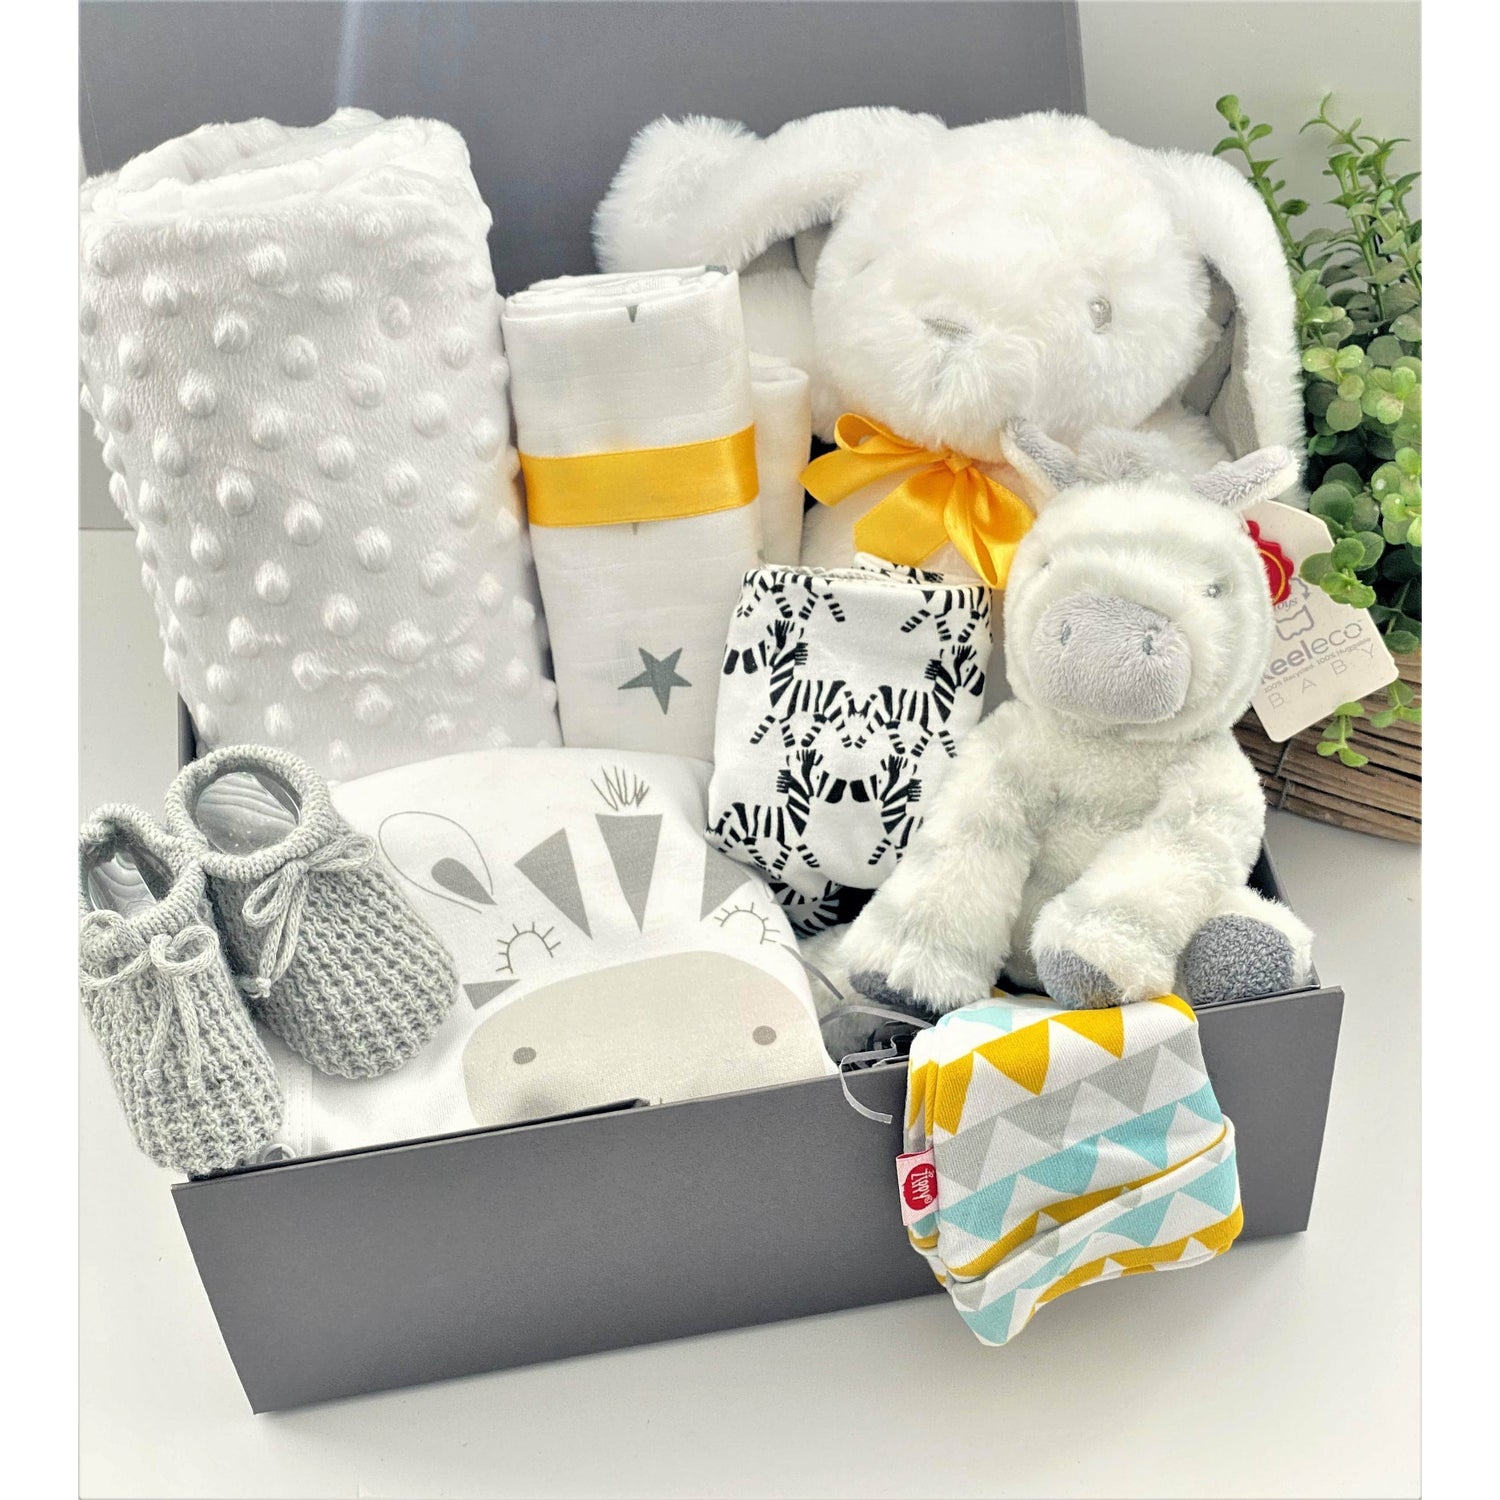 This unisex baby gift hamper comes in a grey magnetic baby keepsake box and contains a large white bunnt baby soft toy with a yellow ribbon around its neck, A zebra soft baby toy, a white baby blanket, a white muslin square with a star pattern, a white baby sleepsuit with a picture od a zebra on the fron that syas "just too cute". A pair of baby booties in grey, a cotton Nuby baby bib with a zebra pattern and a Ziggle geometric pattern baby knot hat.